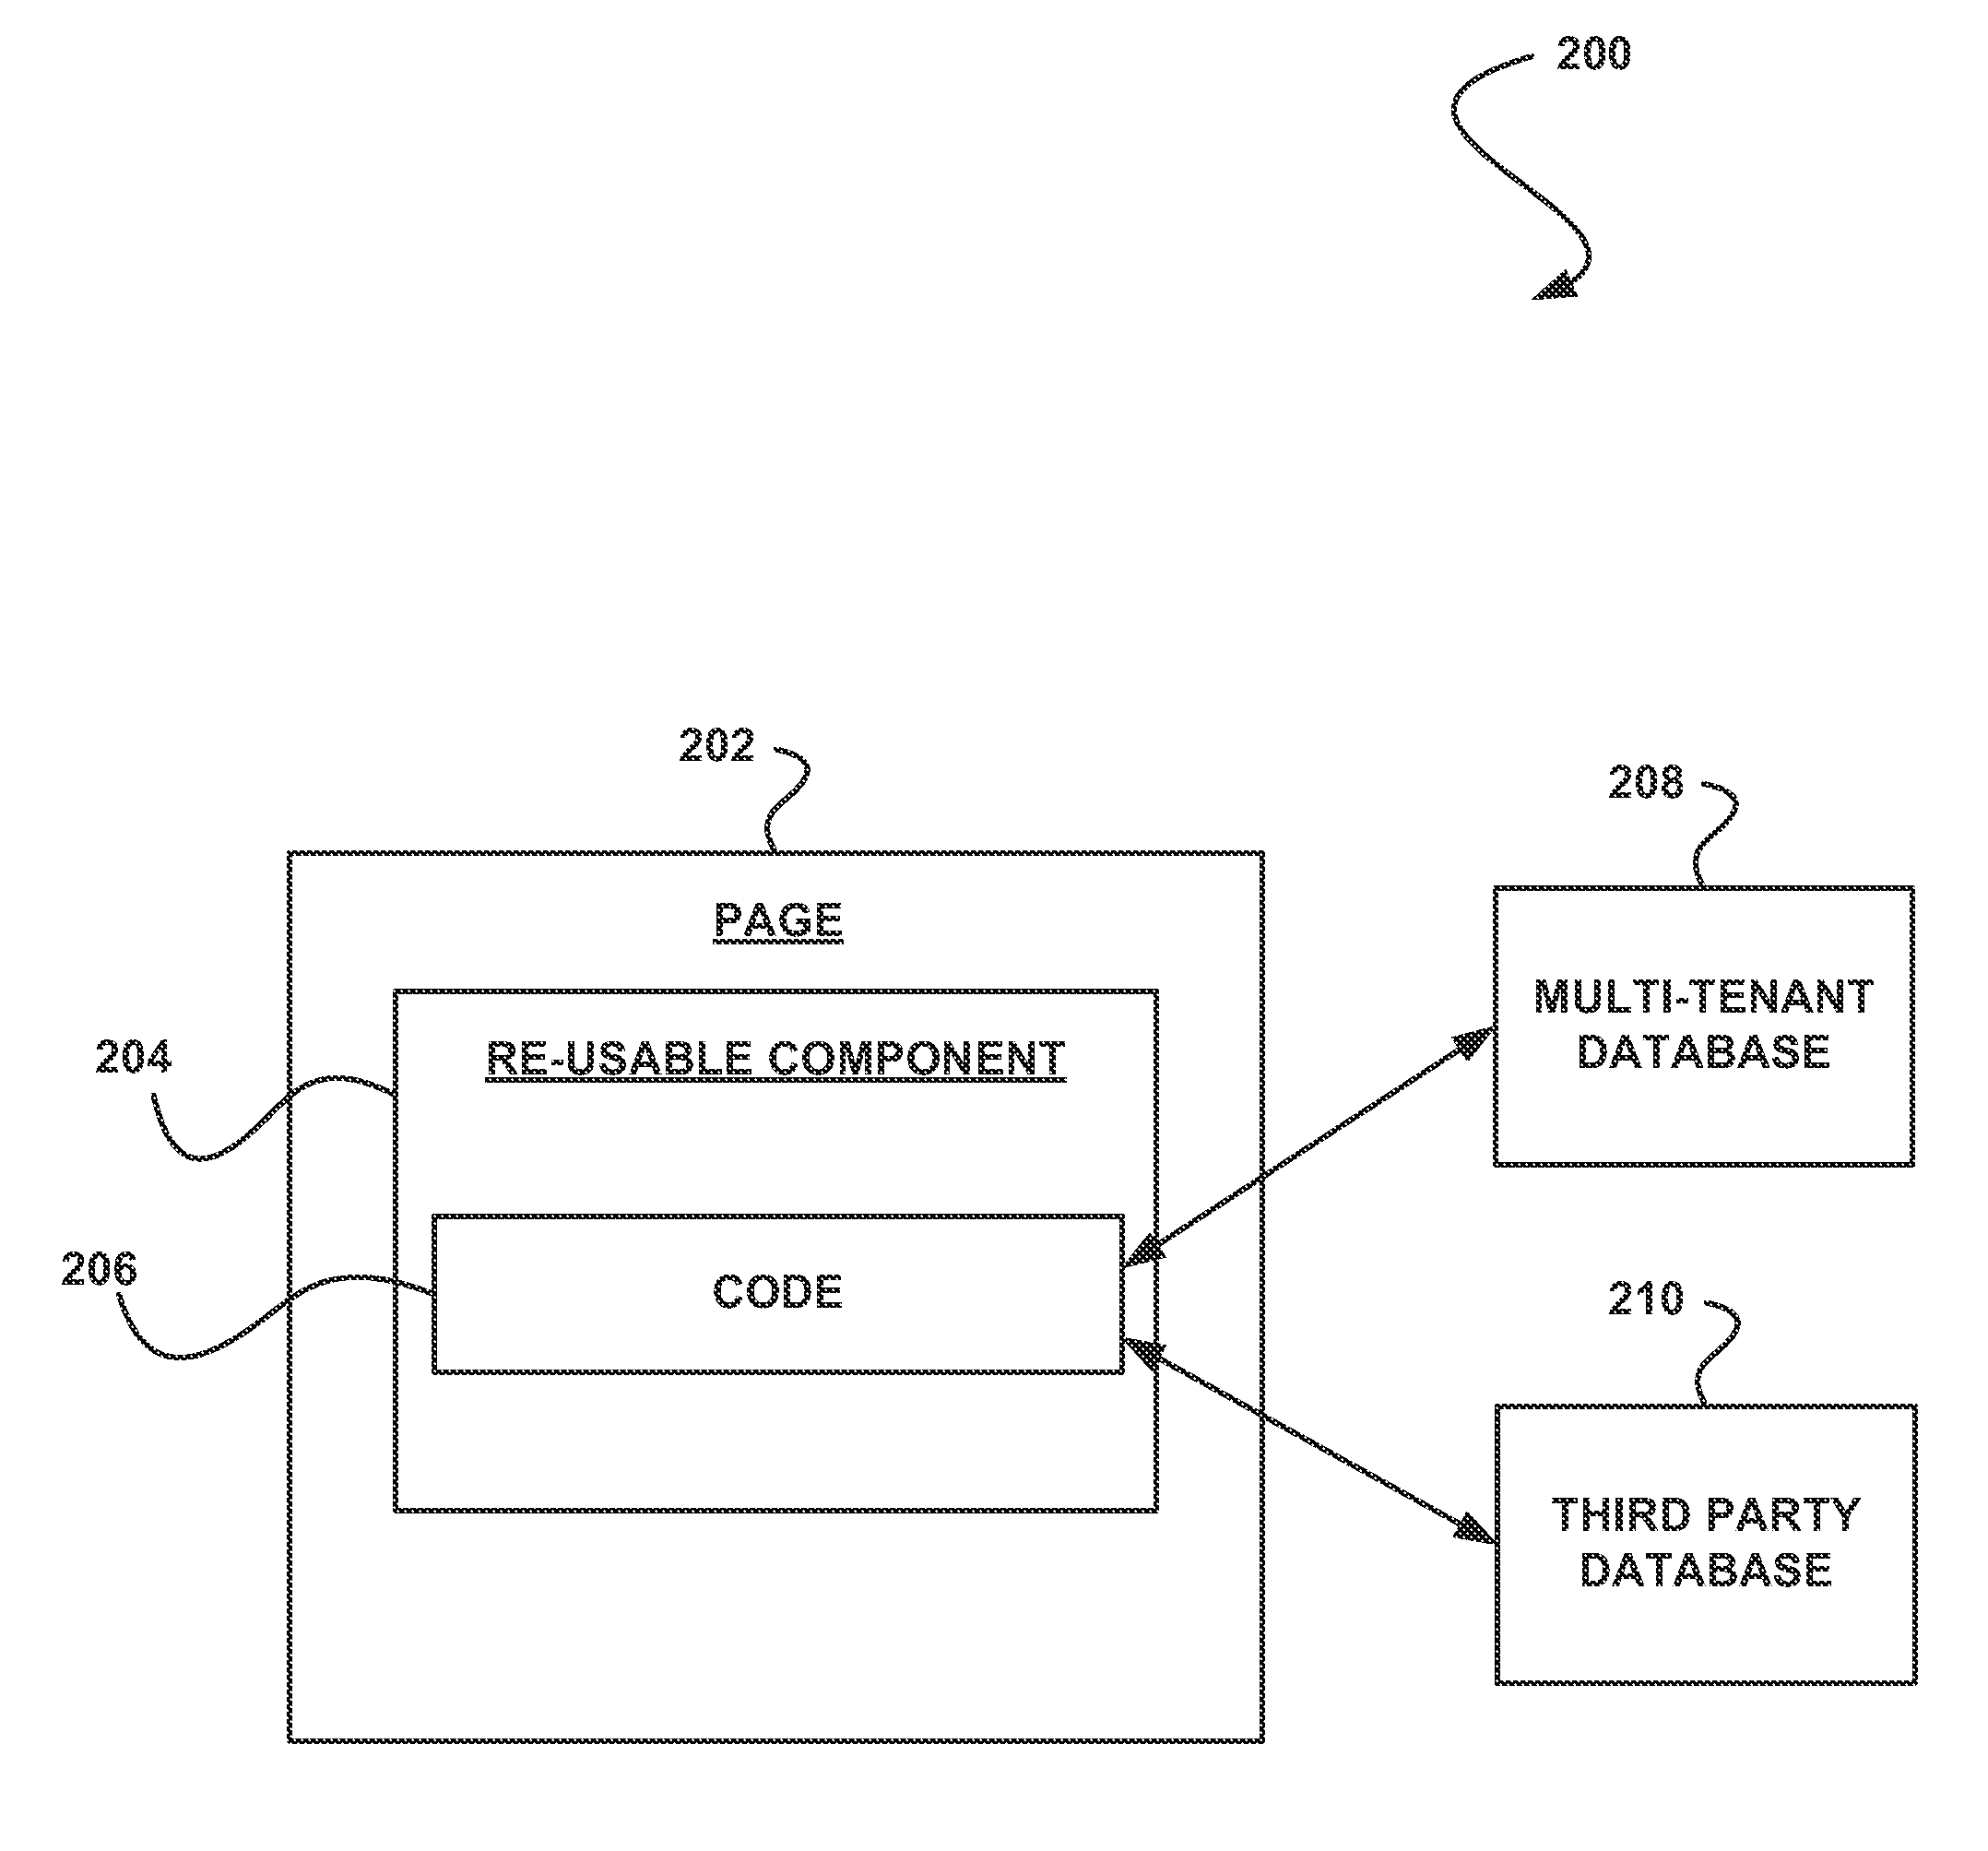 System, method and computer program product for creating a re-usable component utilizing a multi-tenant on-demand database service